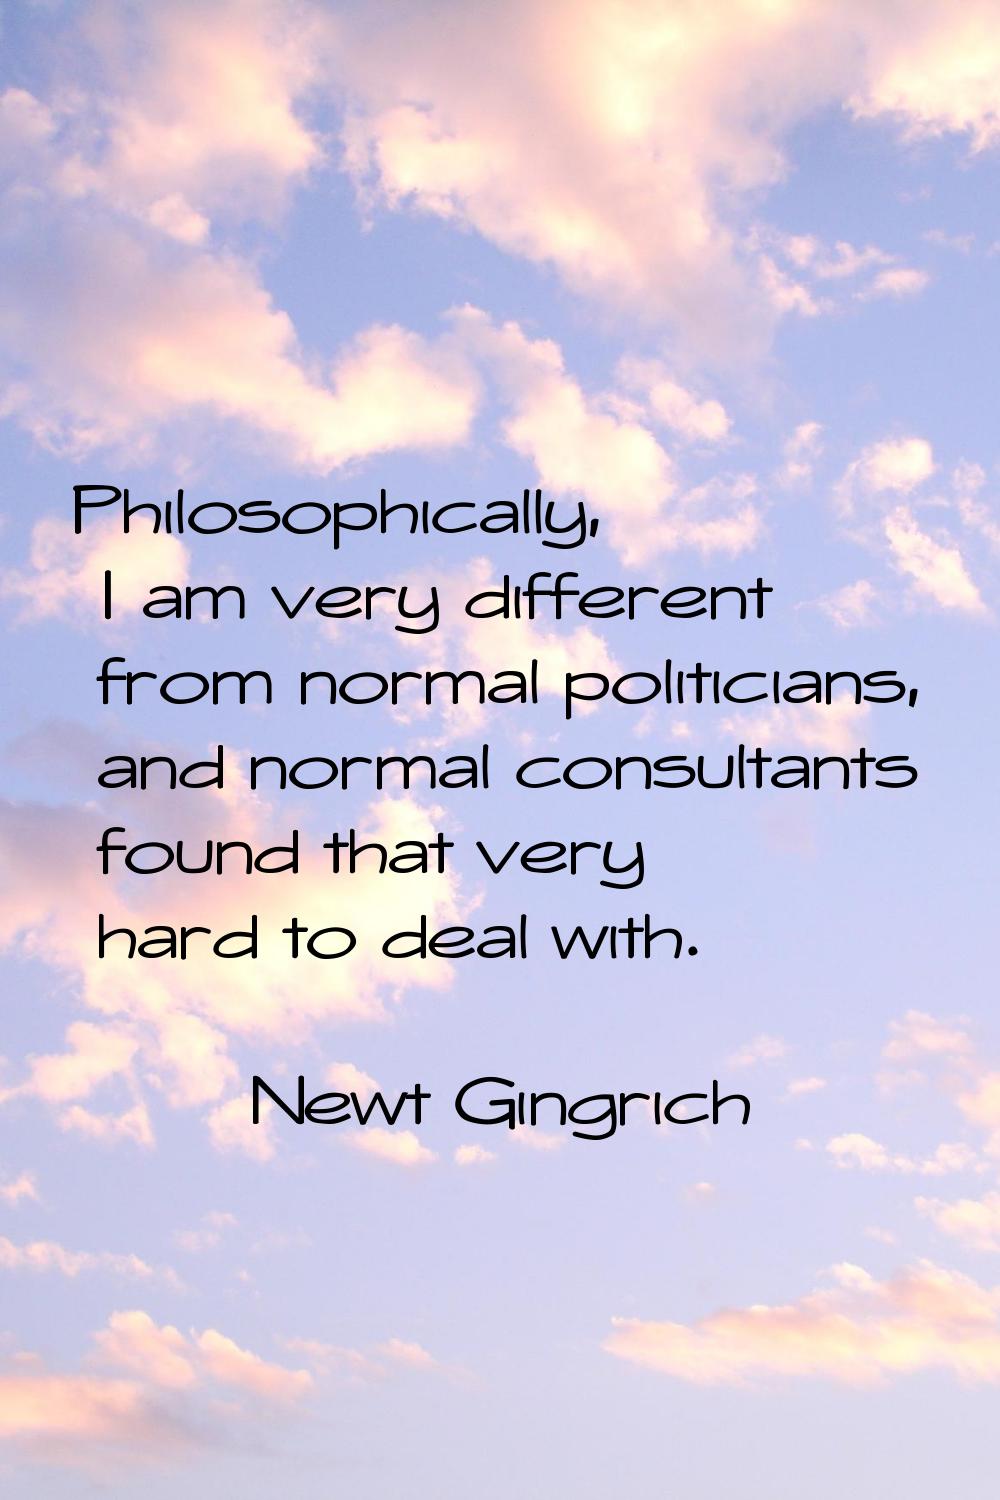 Philosophically, I am very different from normal politicians, and normal consultants found that ver